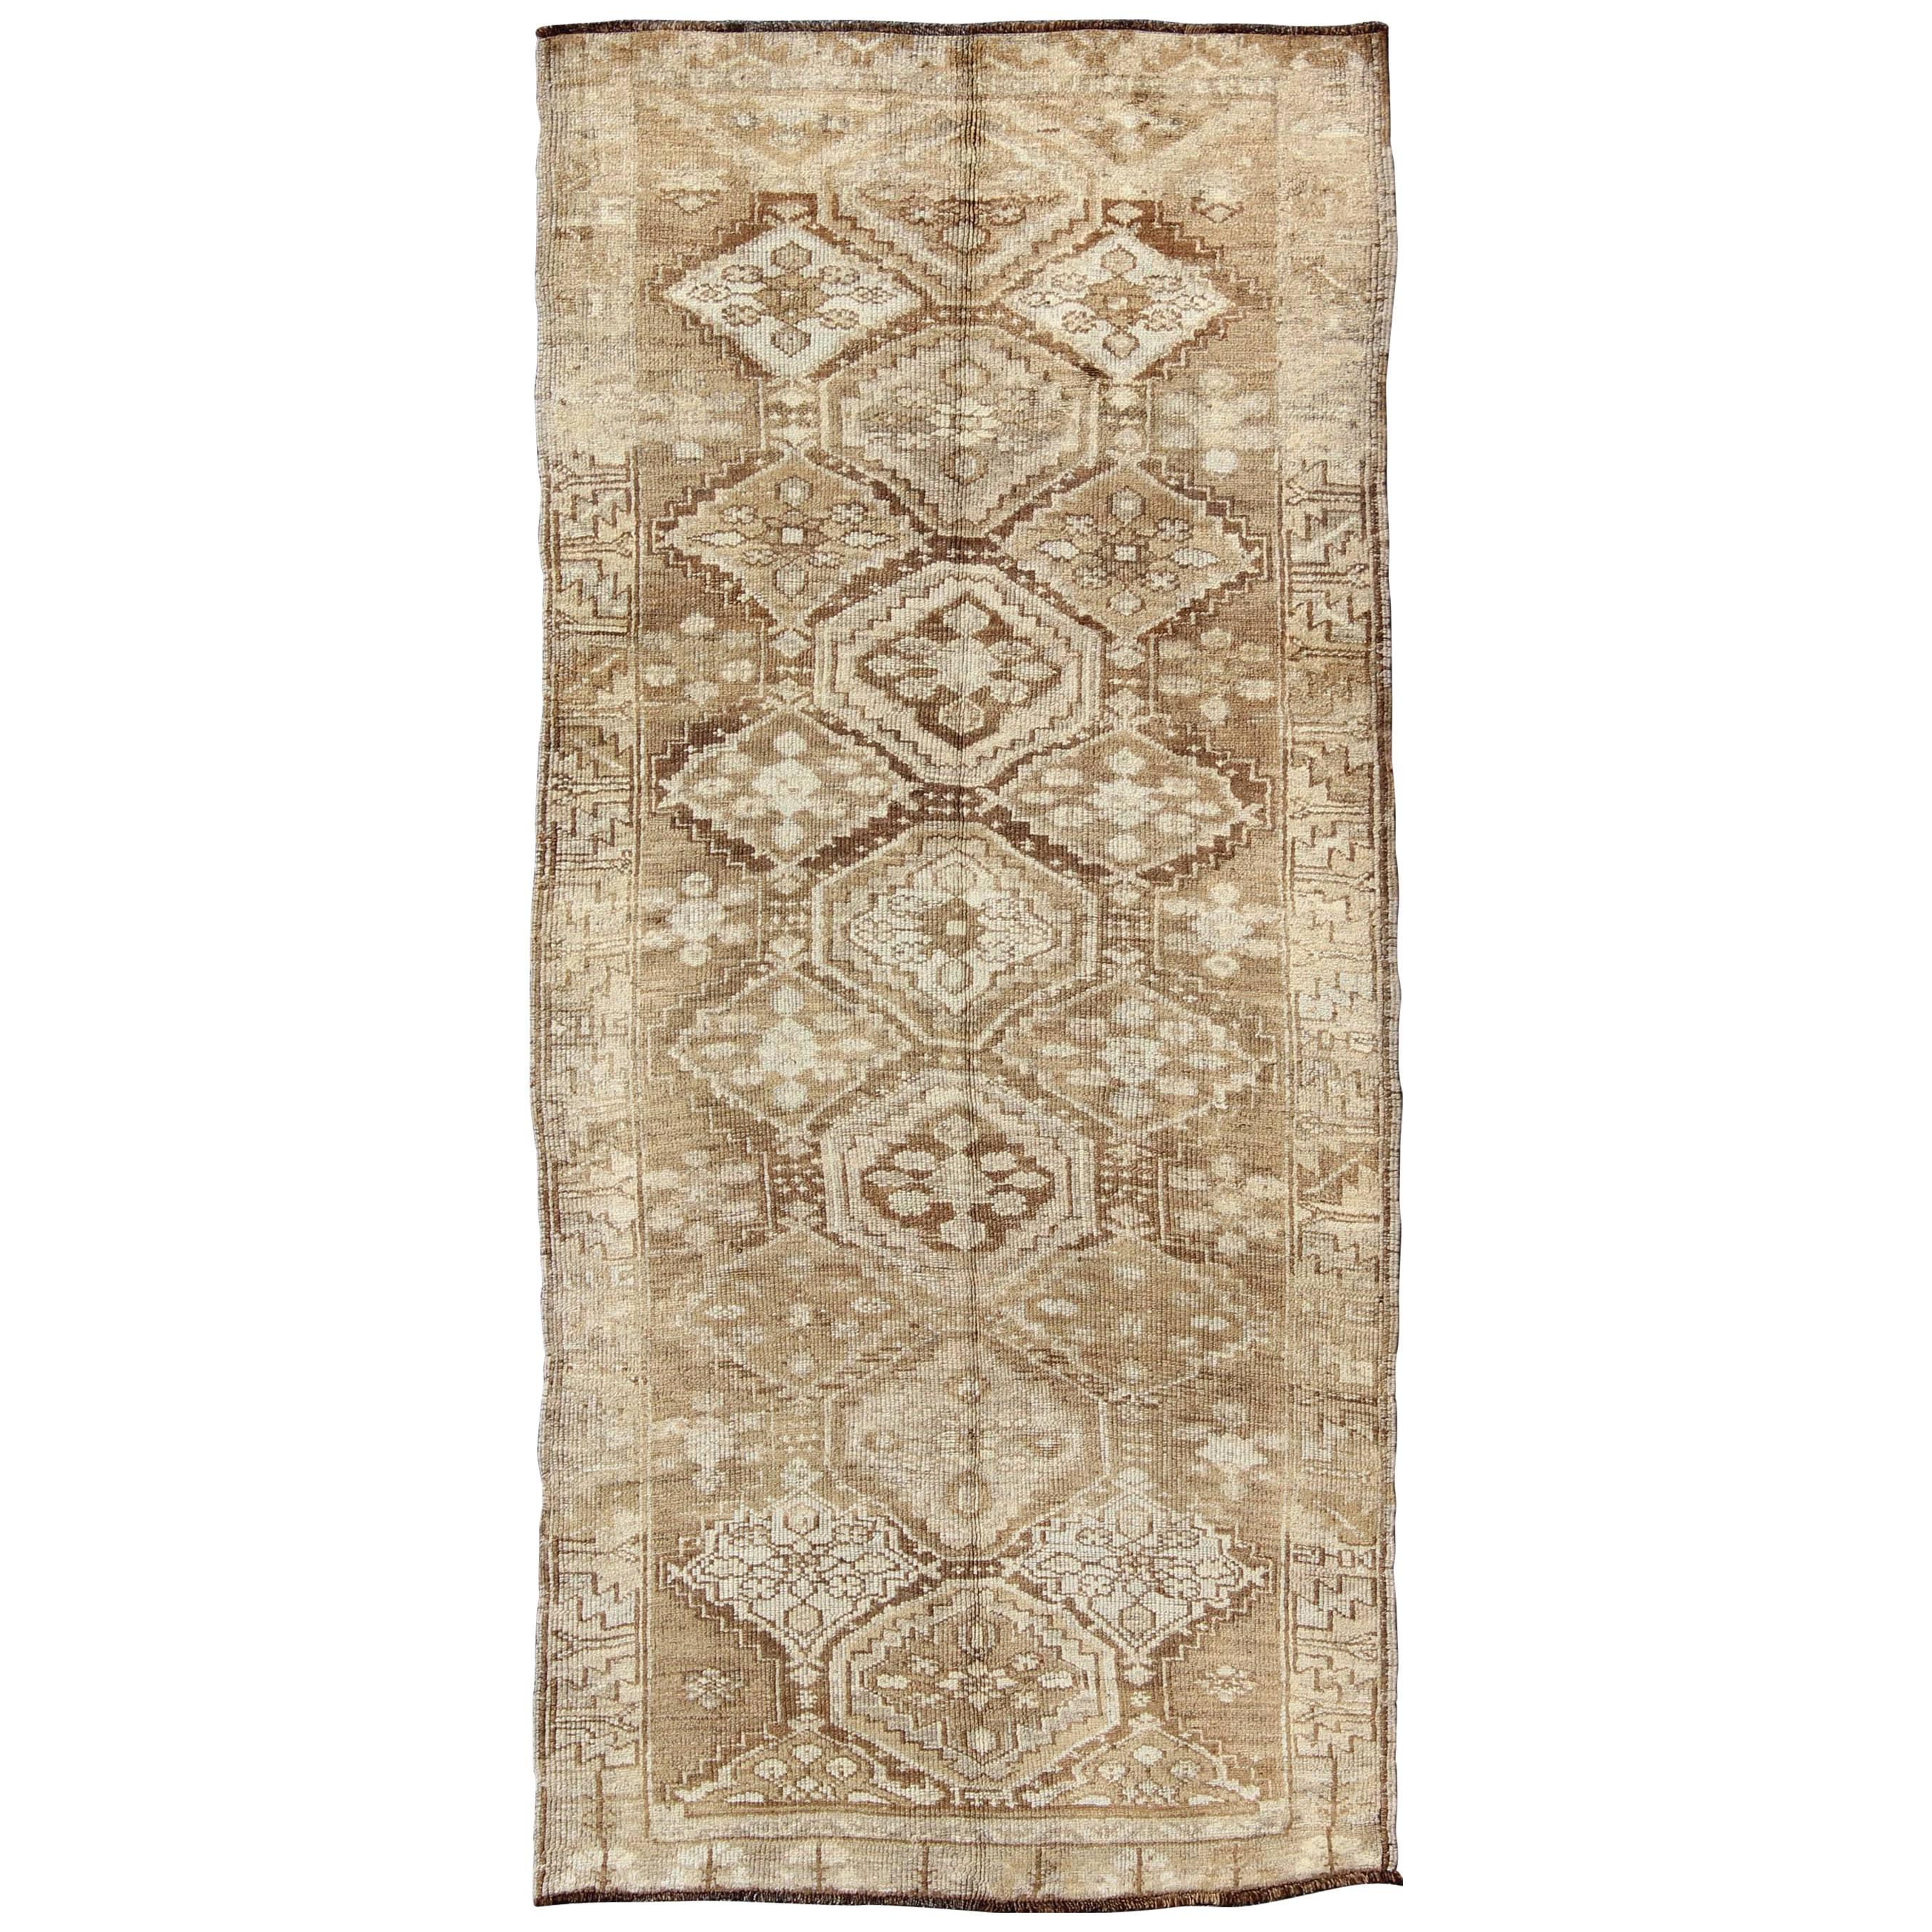 Cream and Tan Brown Vintage Turkish Oushak Runner with All-Over Diamond Design